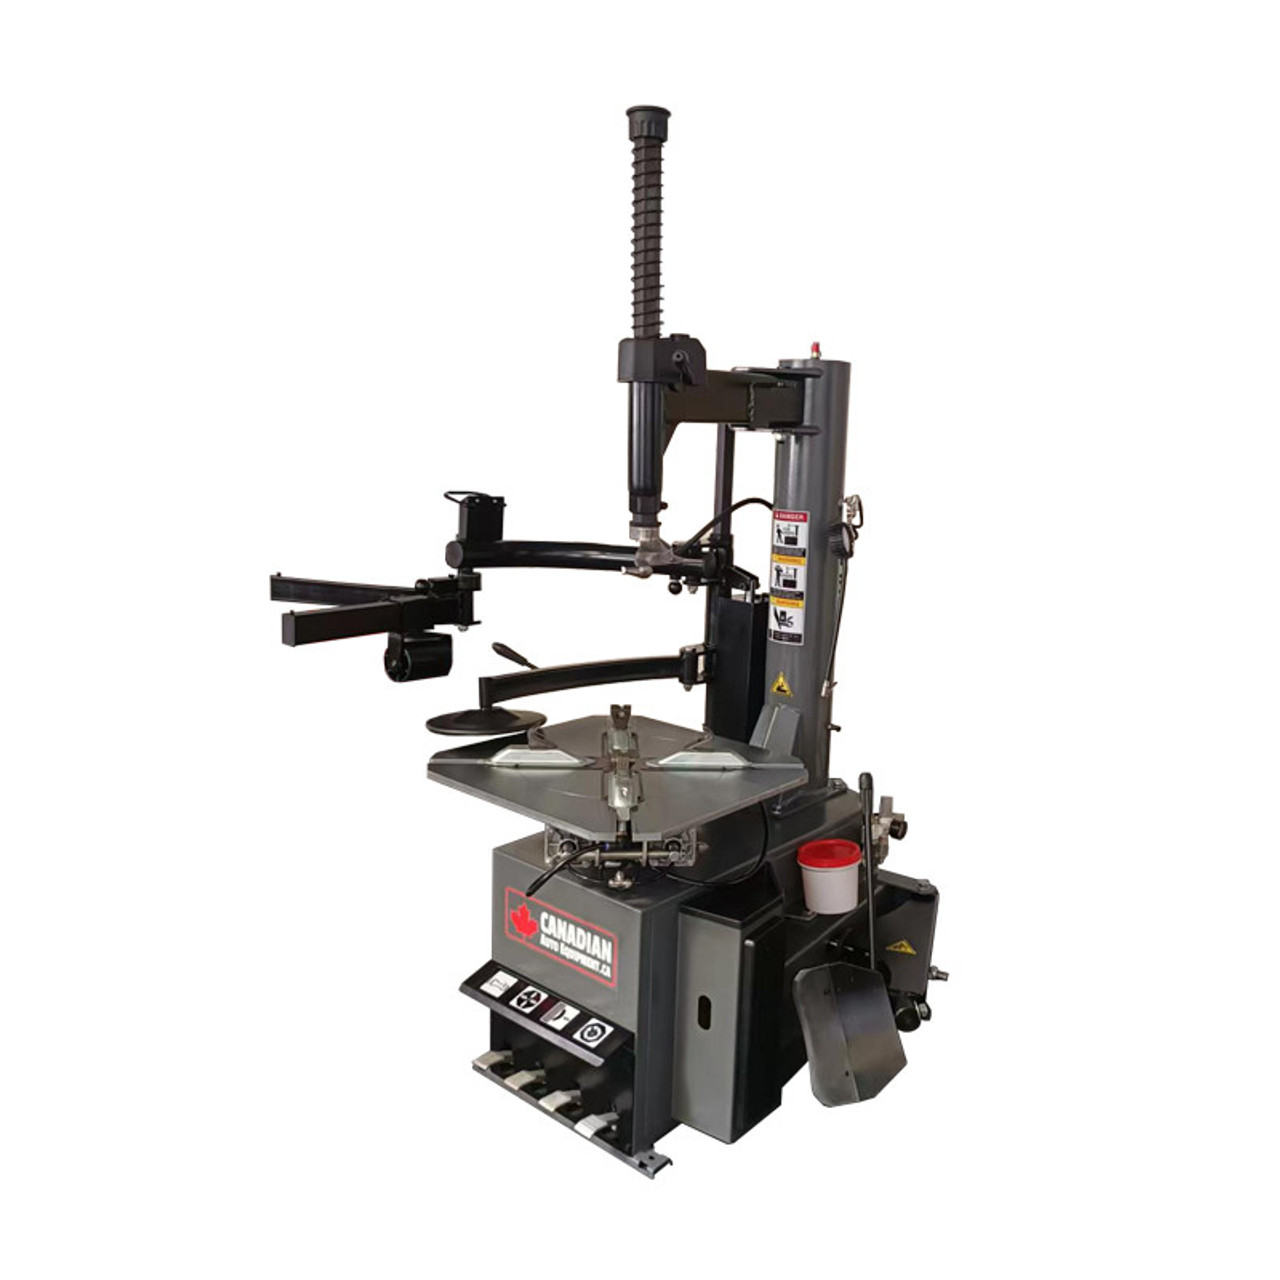 CAE-2625DAA Tire Changer with Left & Right Hand Assist & CAE-3026 Wheel Balancer with Automatic Entry